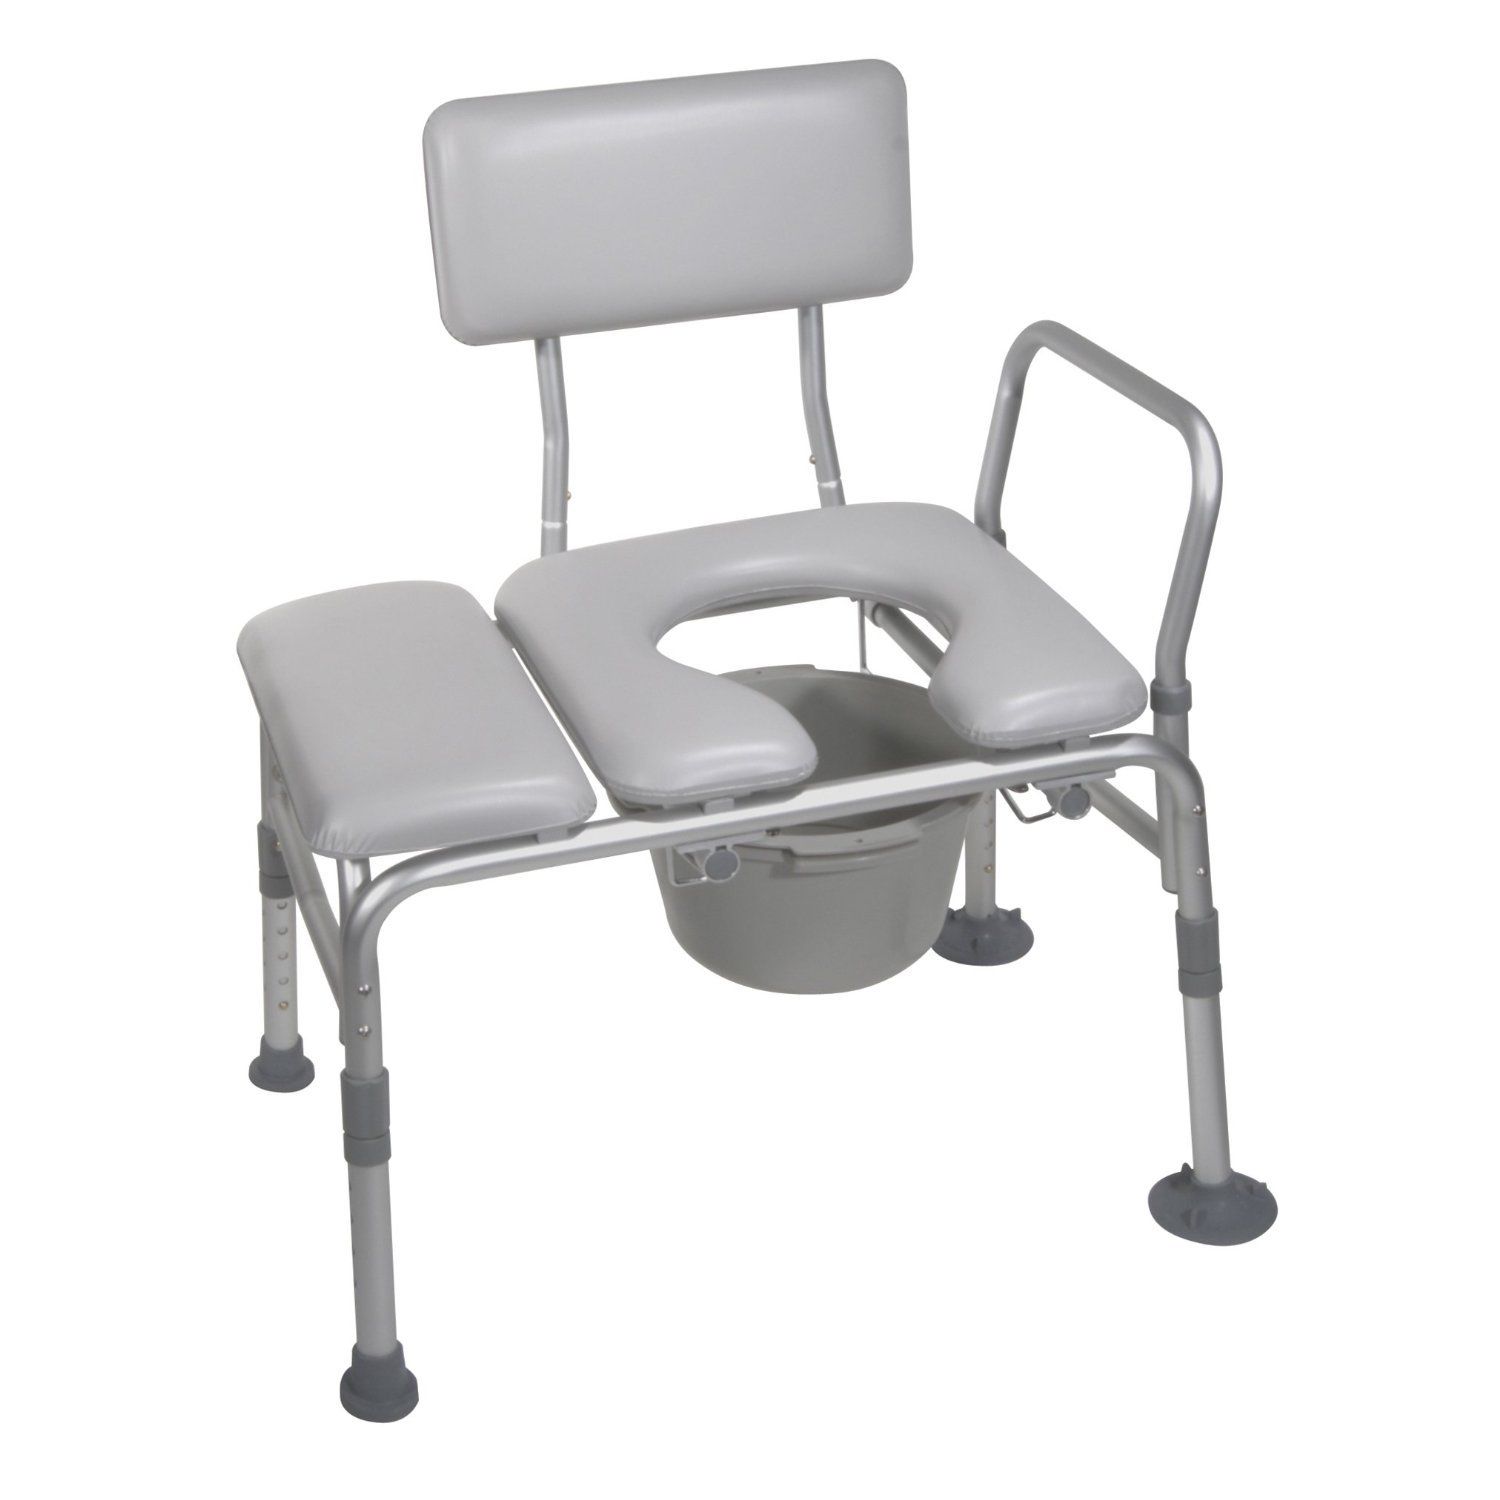 Handicap Padded Seat Transfer Chair Bench Commode Toilet Chair